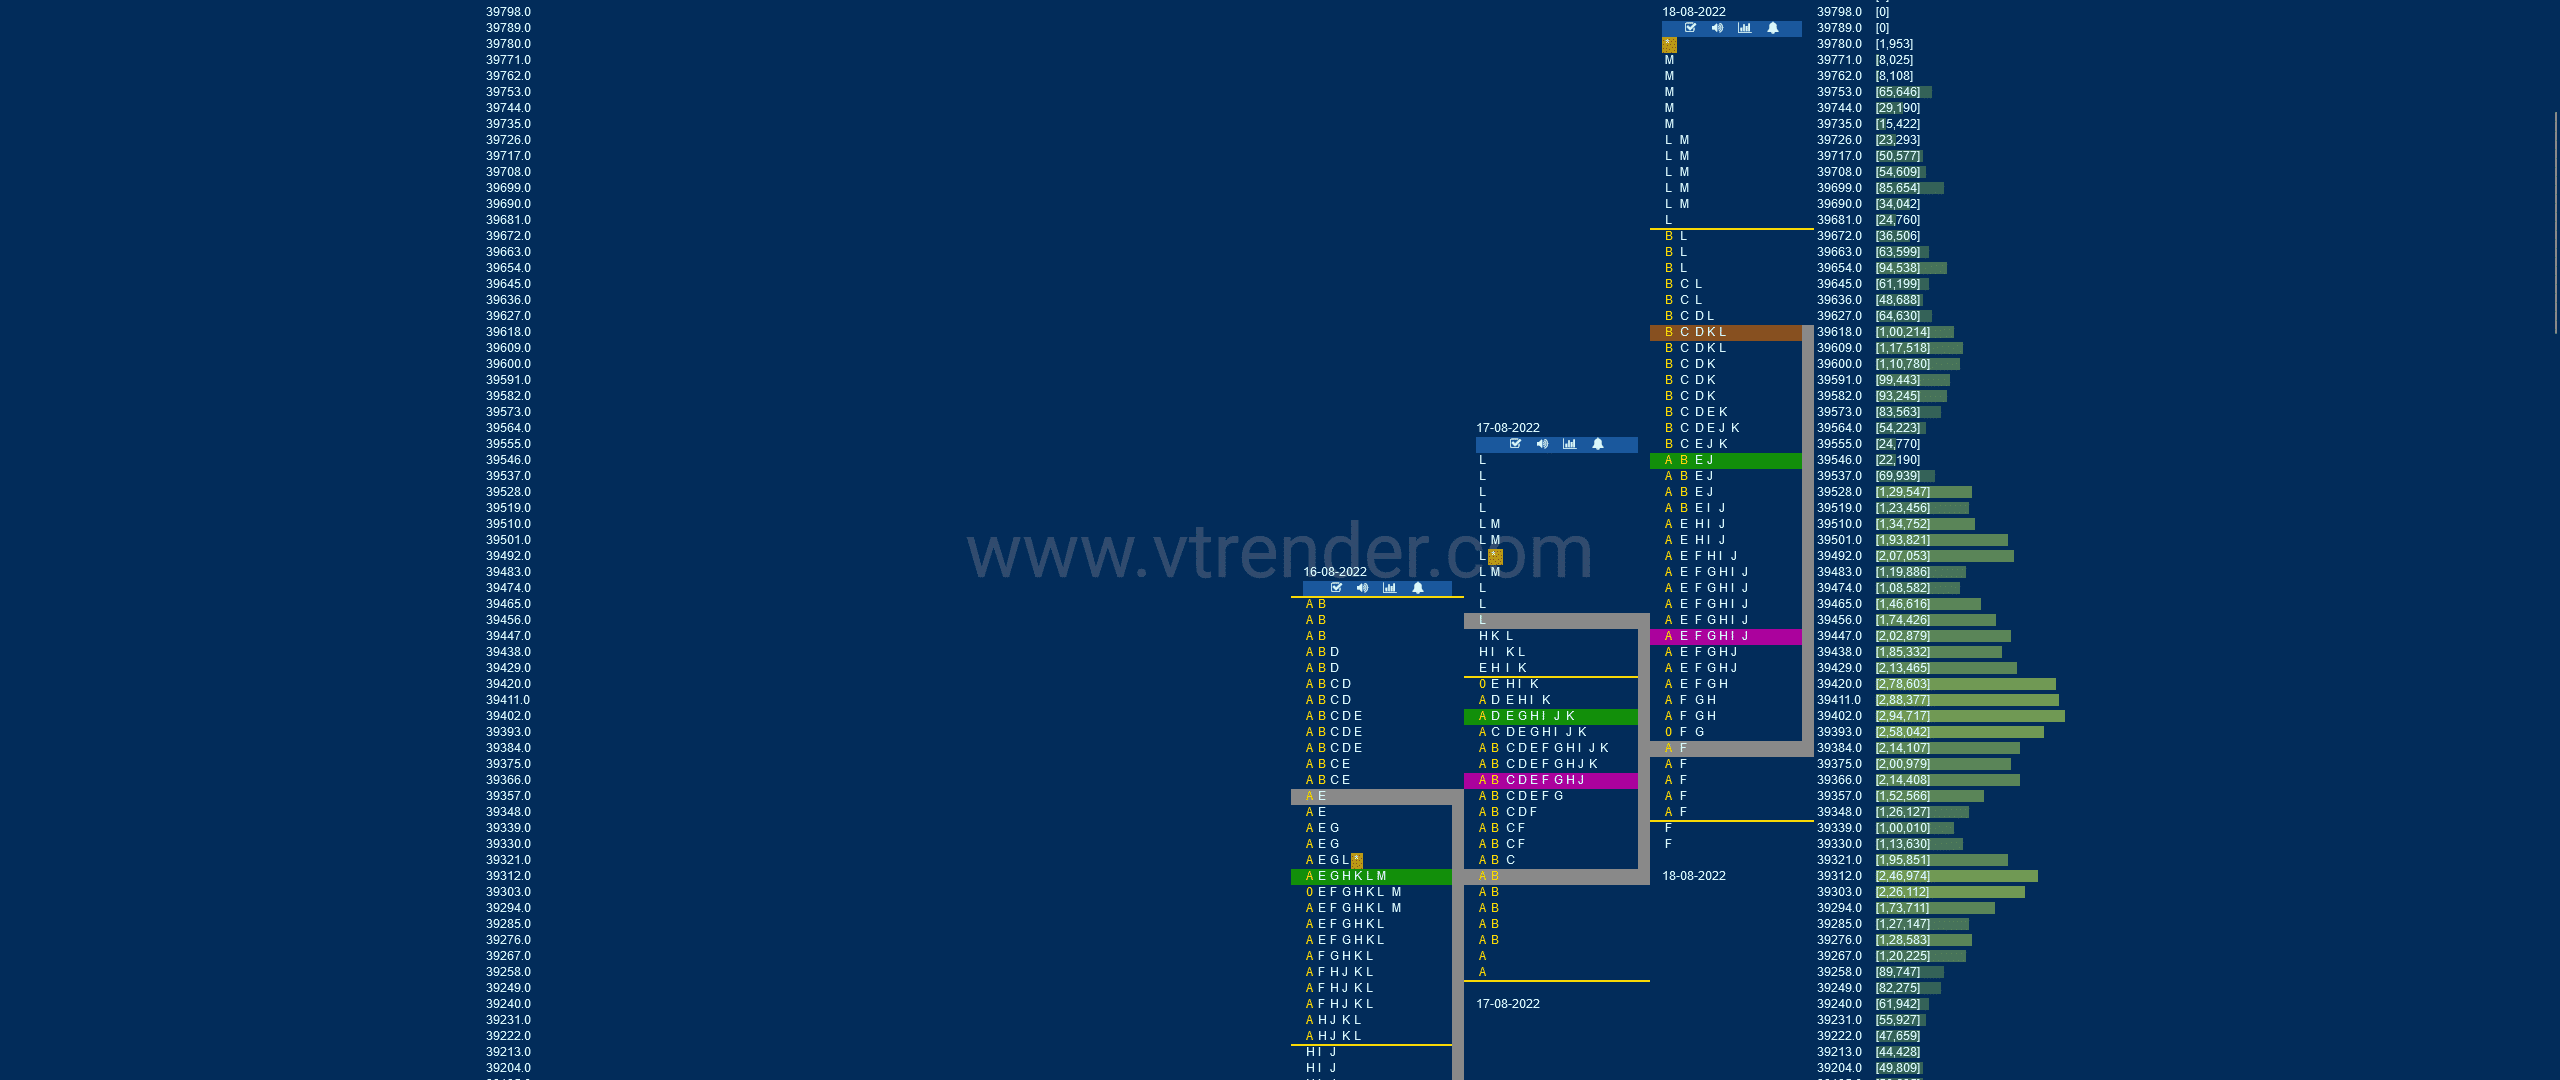 Bnf 12 Market Profile Analysis Dated 18Th Aug 2022 Banknifty Futures, Charts, Day Trading, Intraday Trading, Intraday Trading Strategies, Market Profile, Market Profile Trading Strategies, Nifty Futures, Order Flow Analysis, Support And Resistance, Technical Analysis, Trading Strategies, Volume Profile Trading